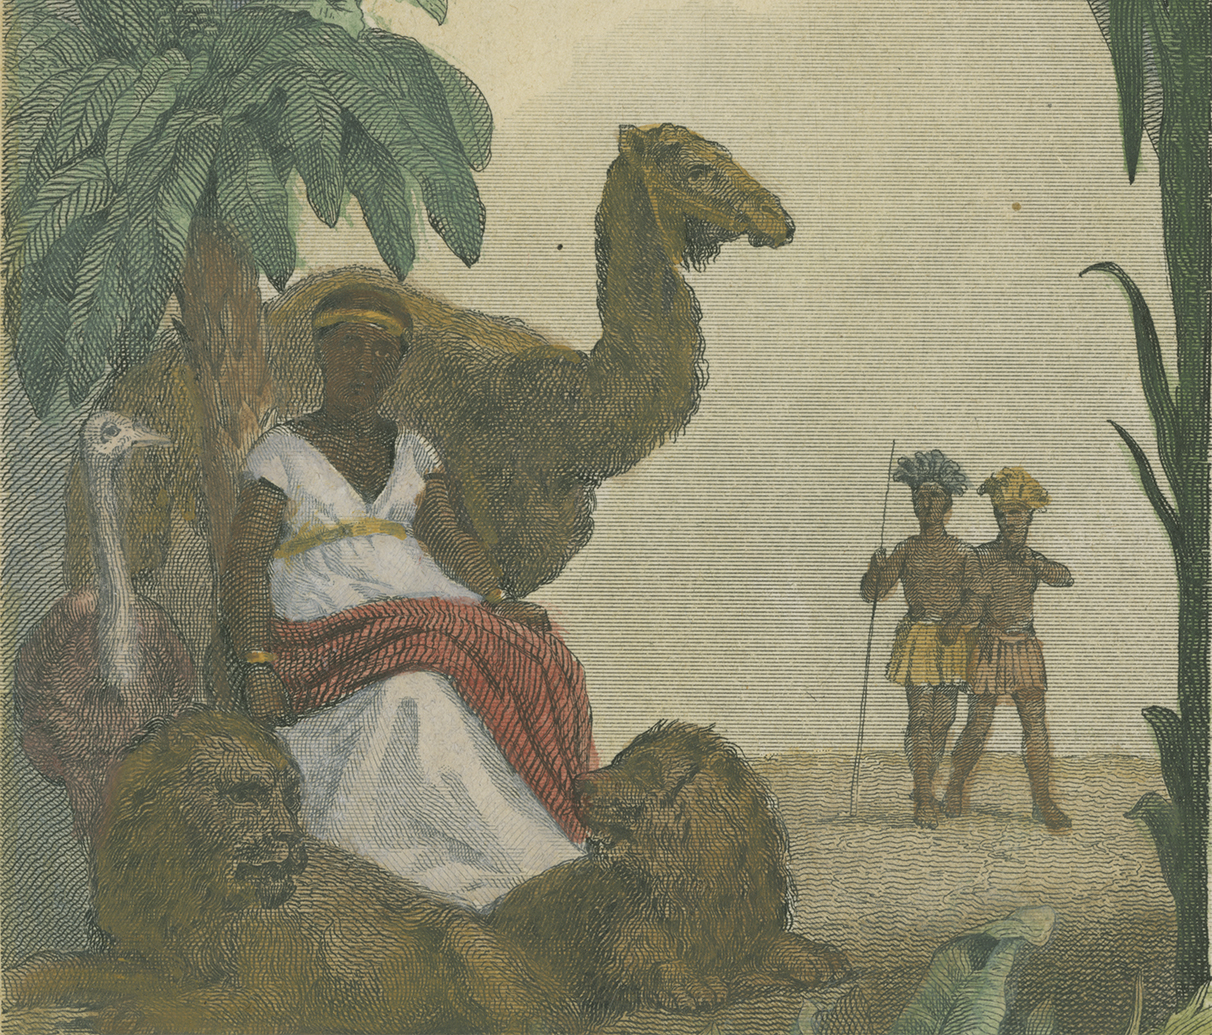 Closeup view of an African woman, camel, and warriors from map of Africa.